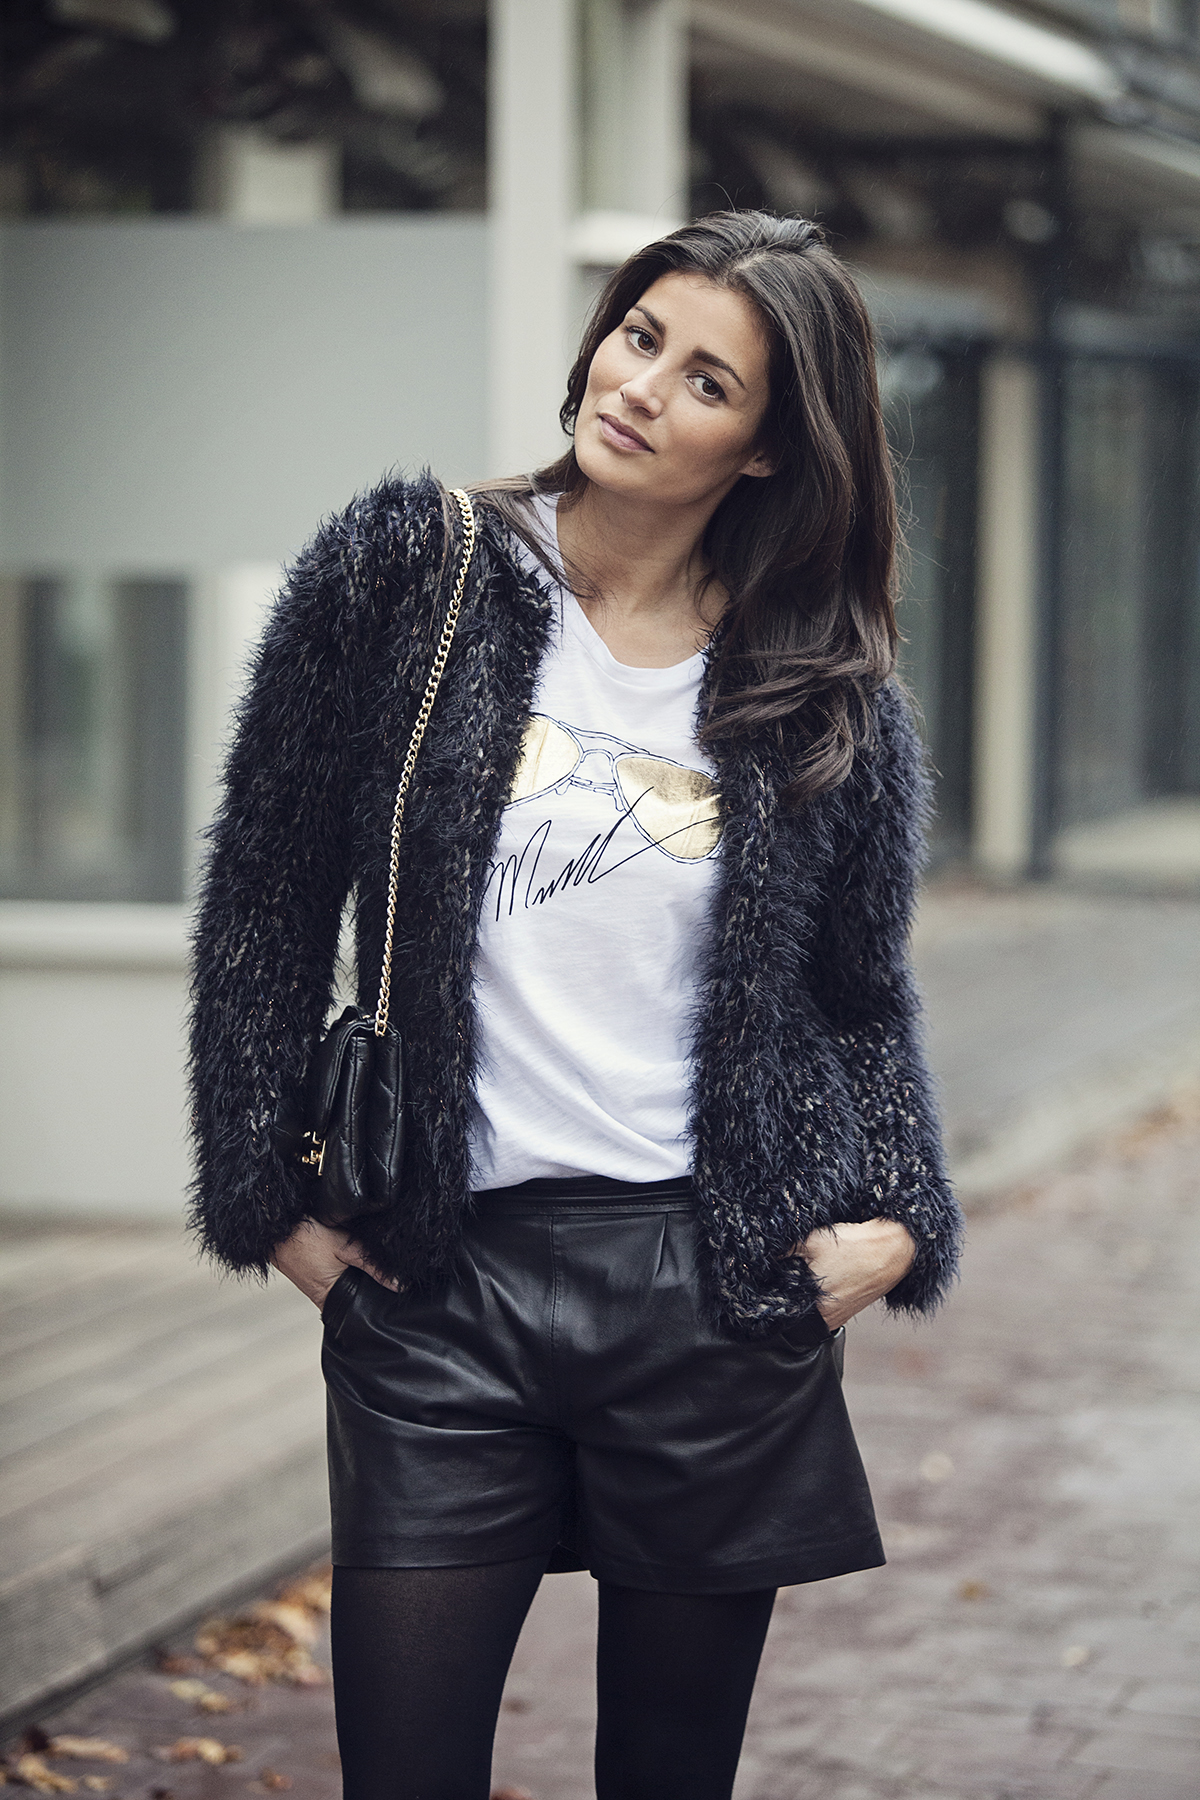 How to wear leather shorts in autrumn winter blogforshops streetstyle 2014 Michael Kors Kiro by Kim